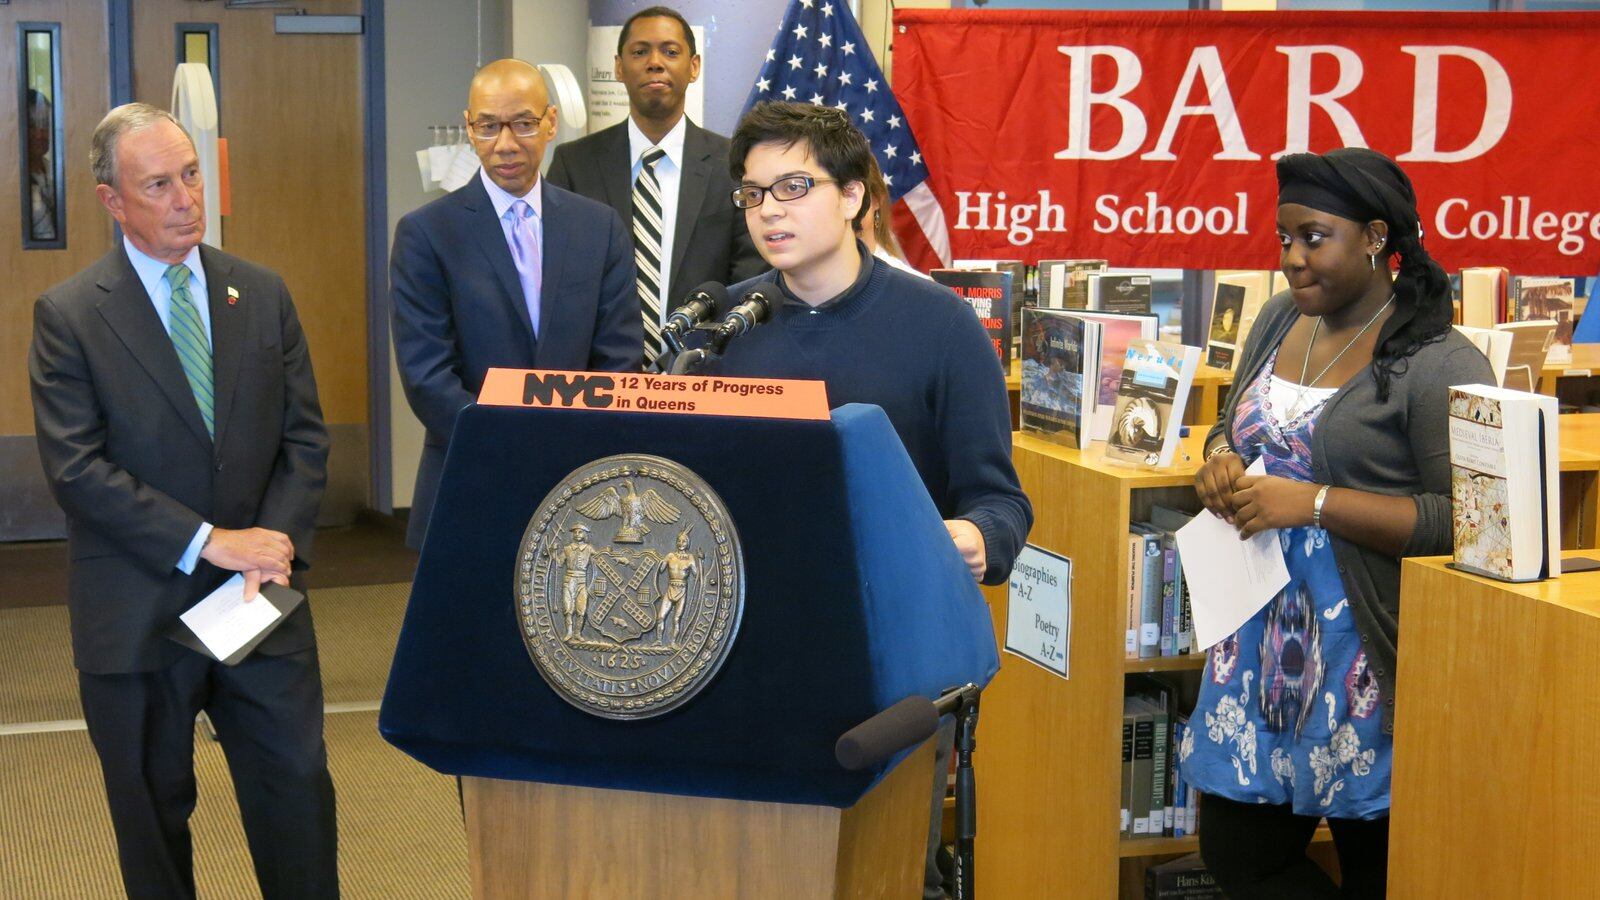 Bard Queens student Omar Ferreira said he benefitted from the personal attention of a small school last year.